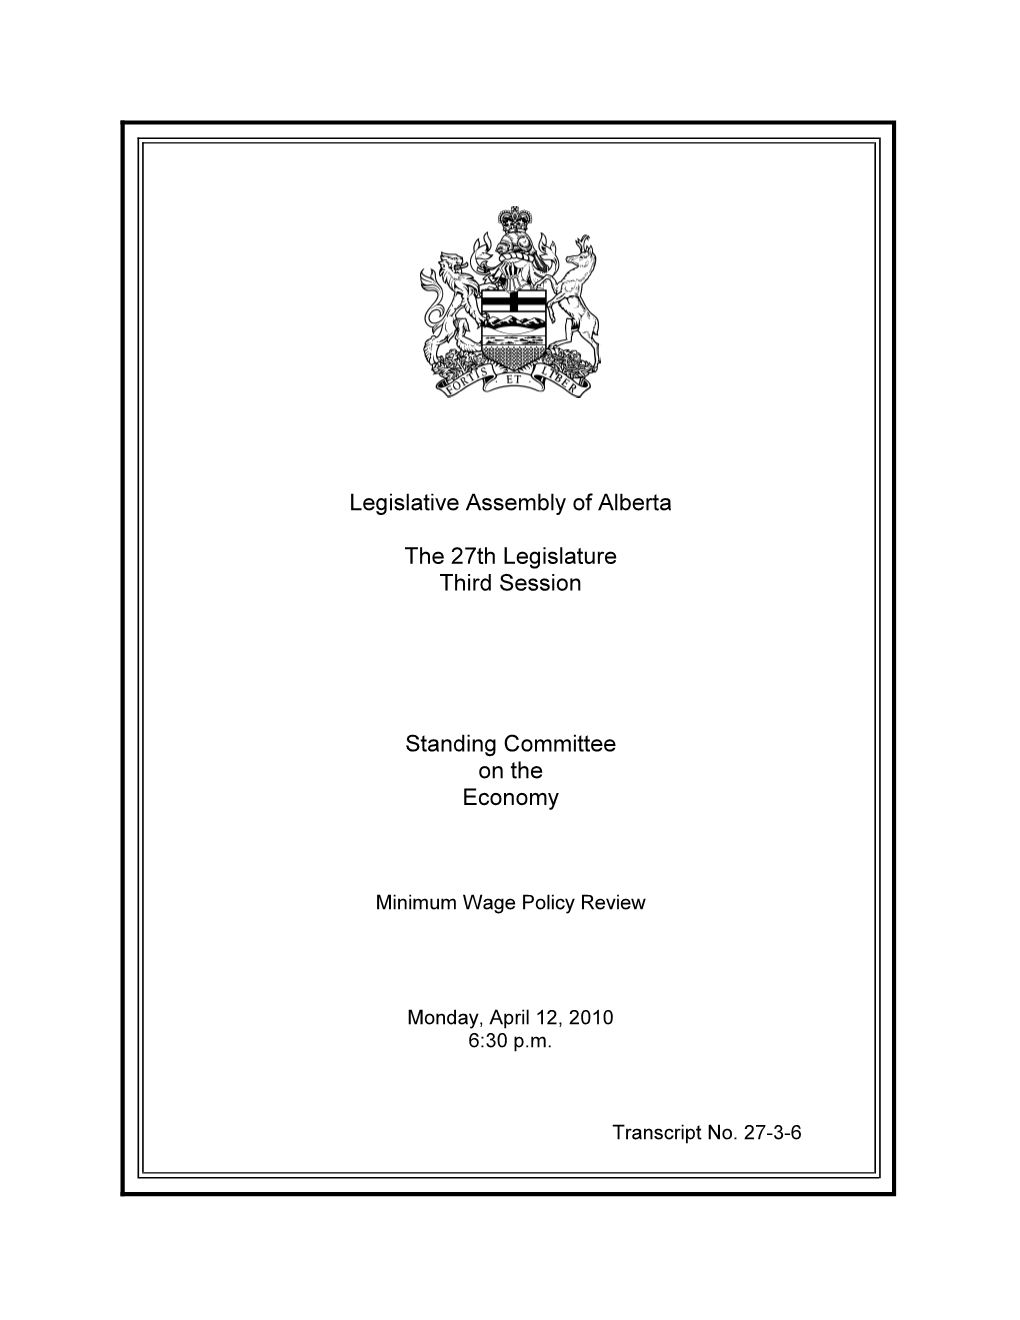 Legislative Assembly of Alberta the 27Th Legislature Third Session Standing Committee on the Economy